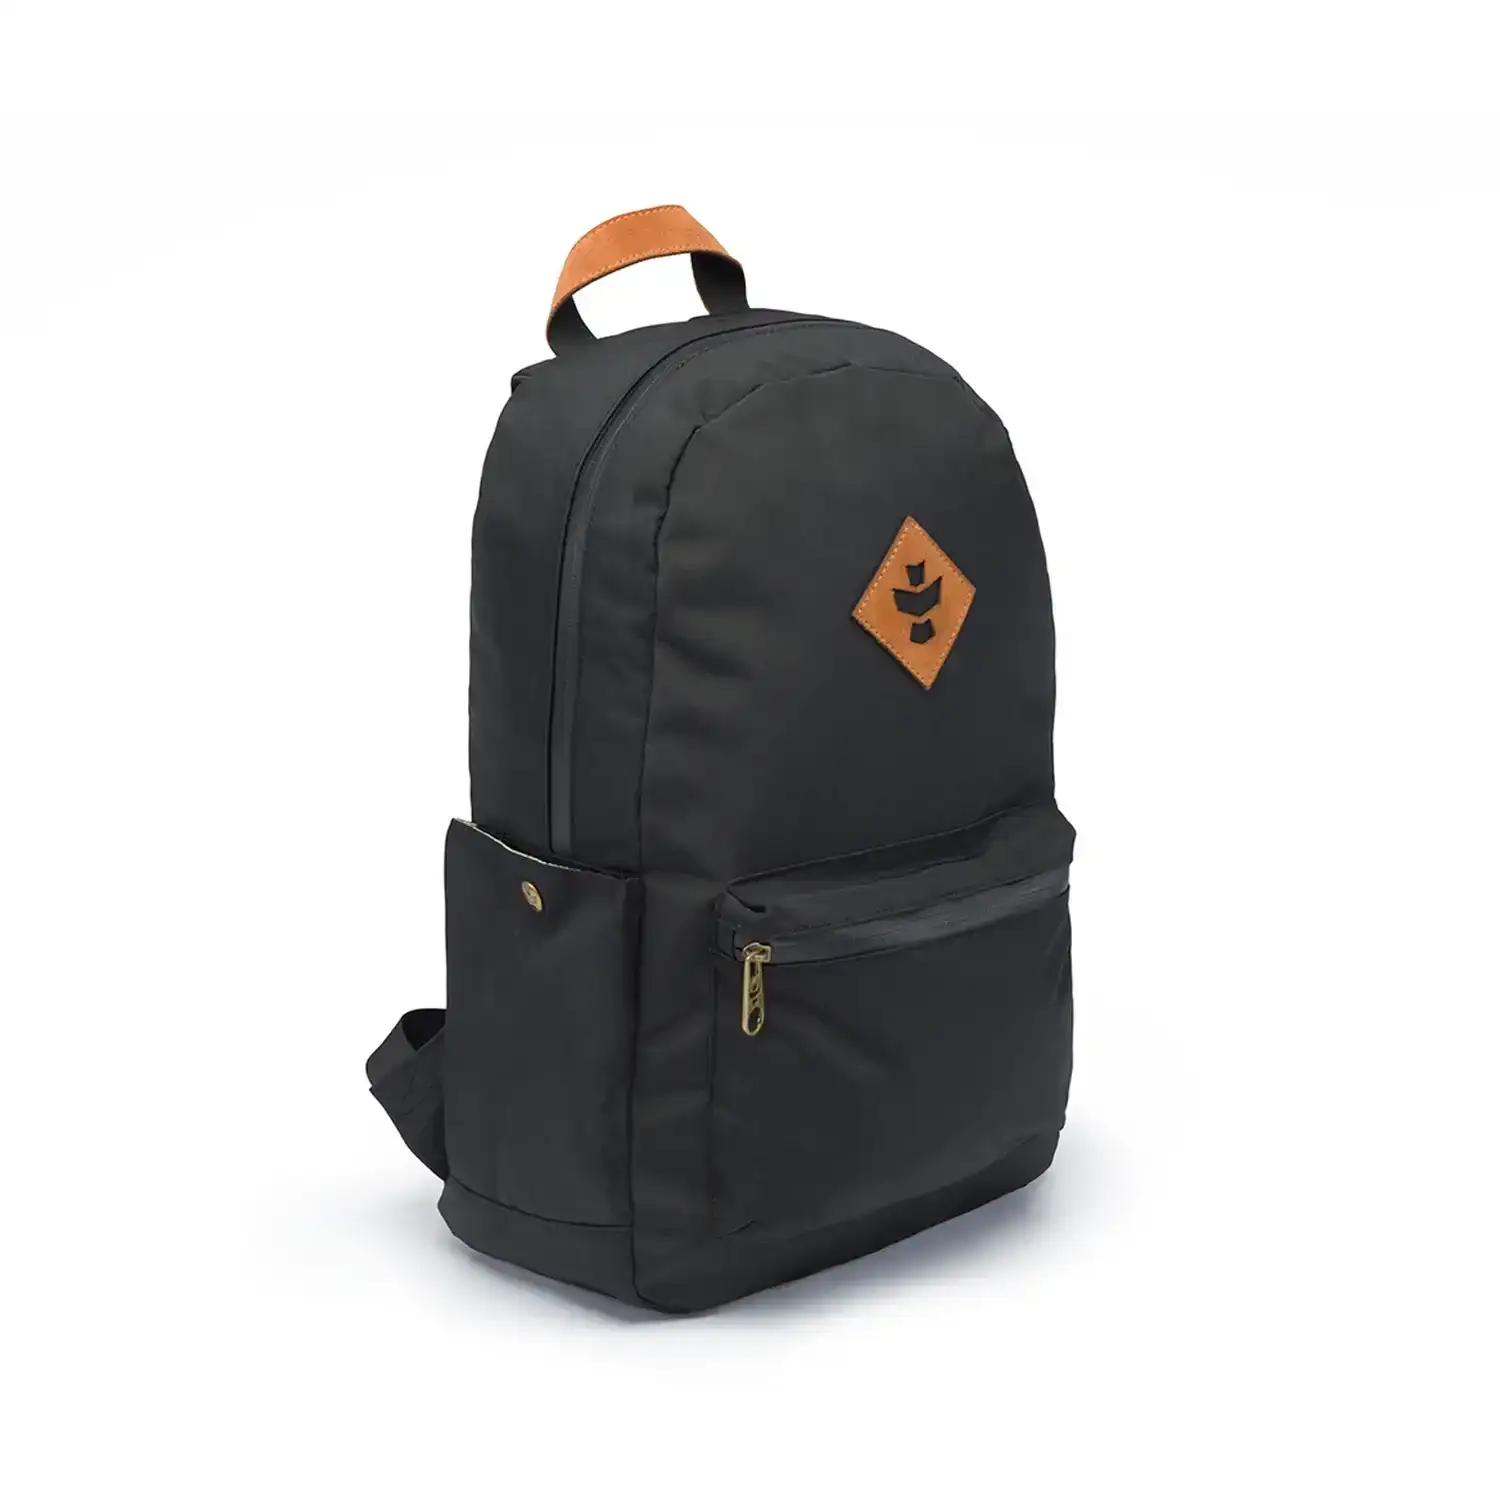 Image of The Explorer - Smell Proof Backpack